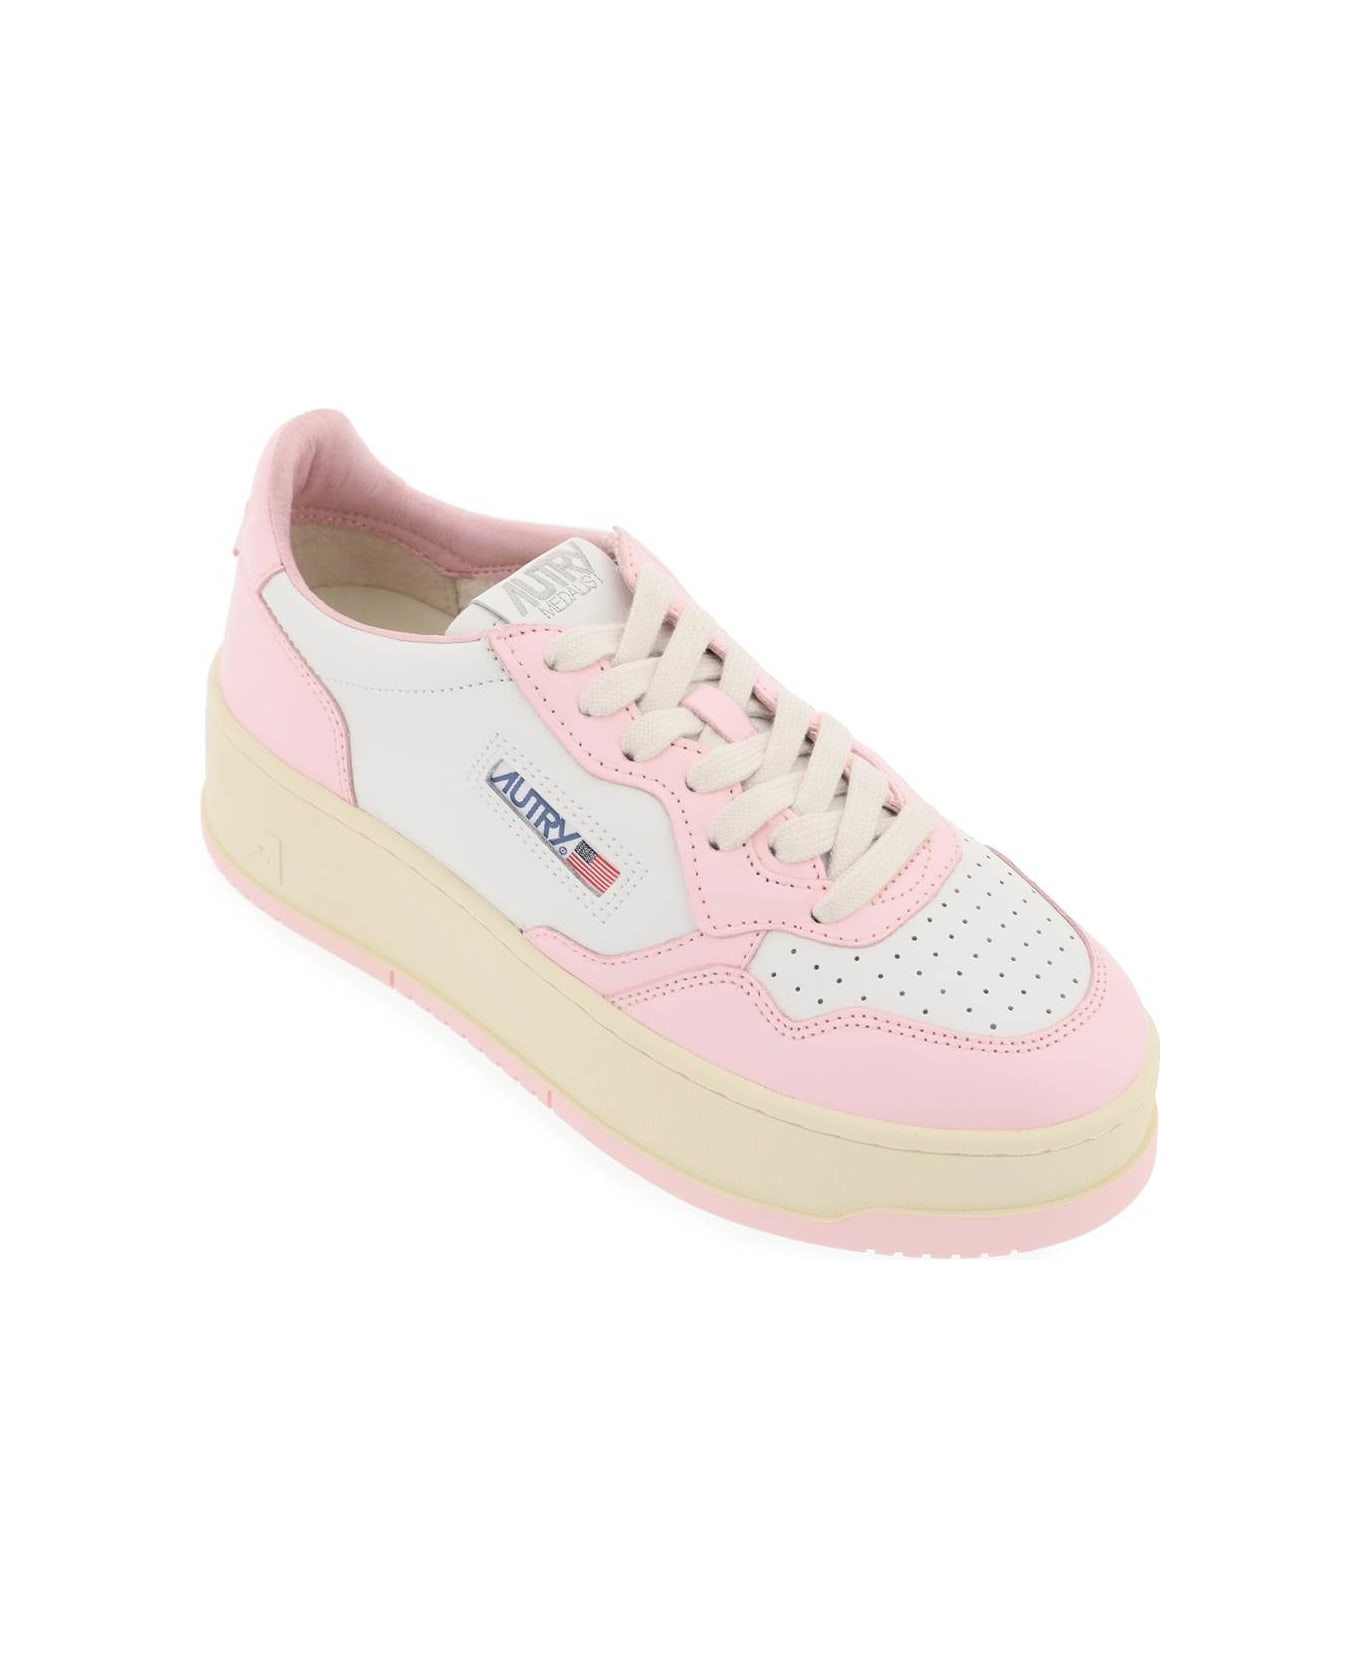 Autry Medalist Low Sneakers - BLUSH BRIDE (White)